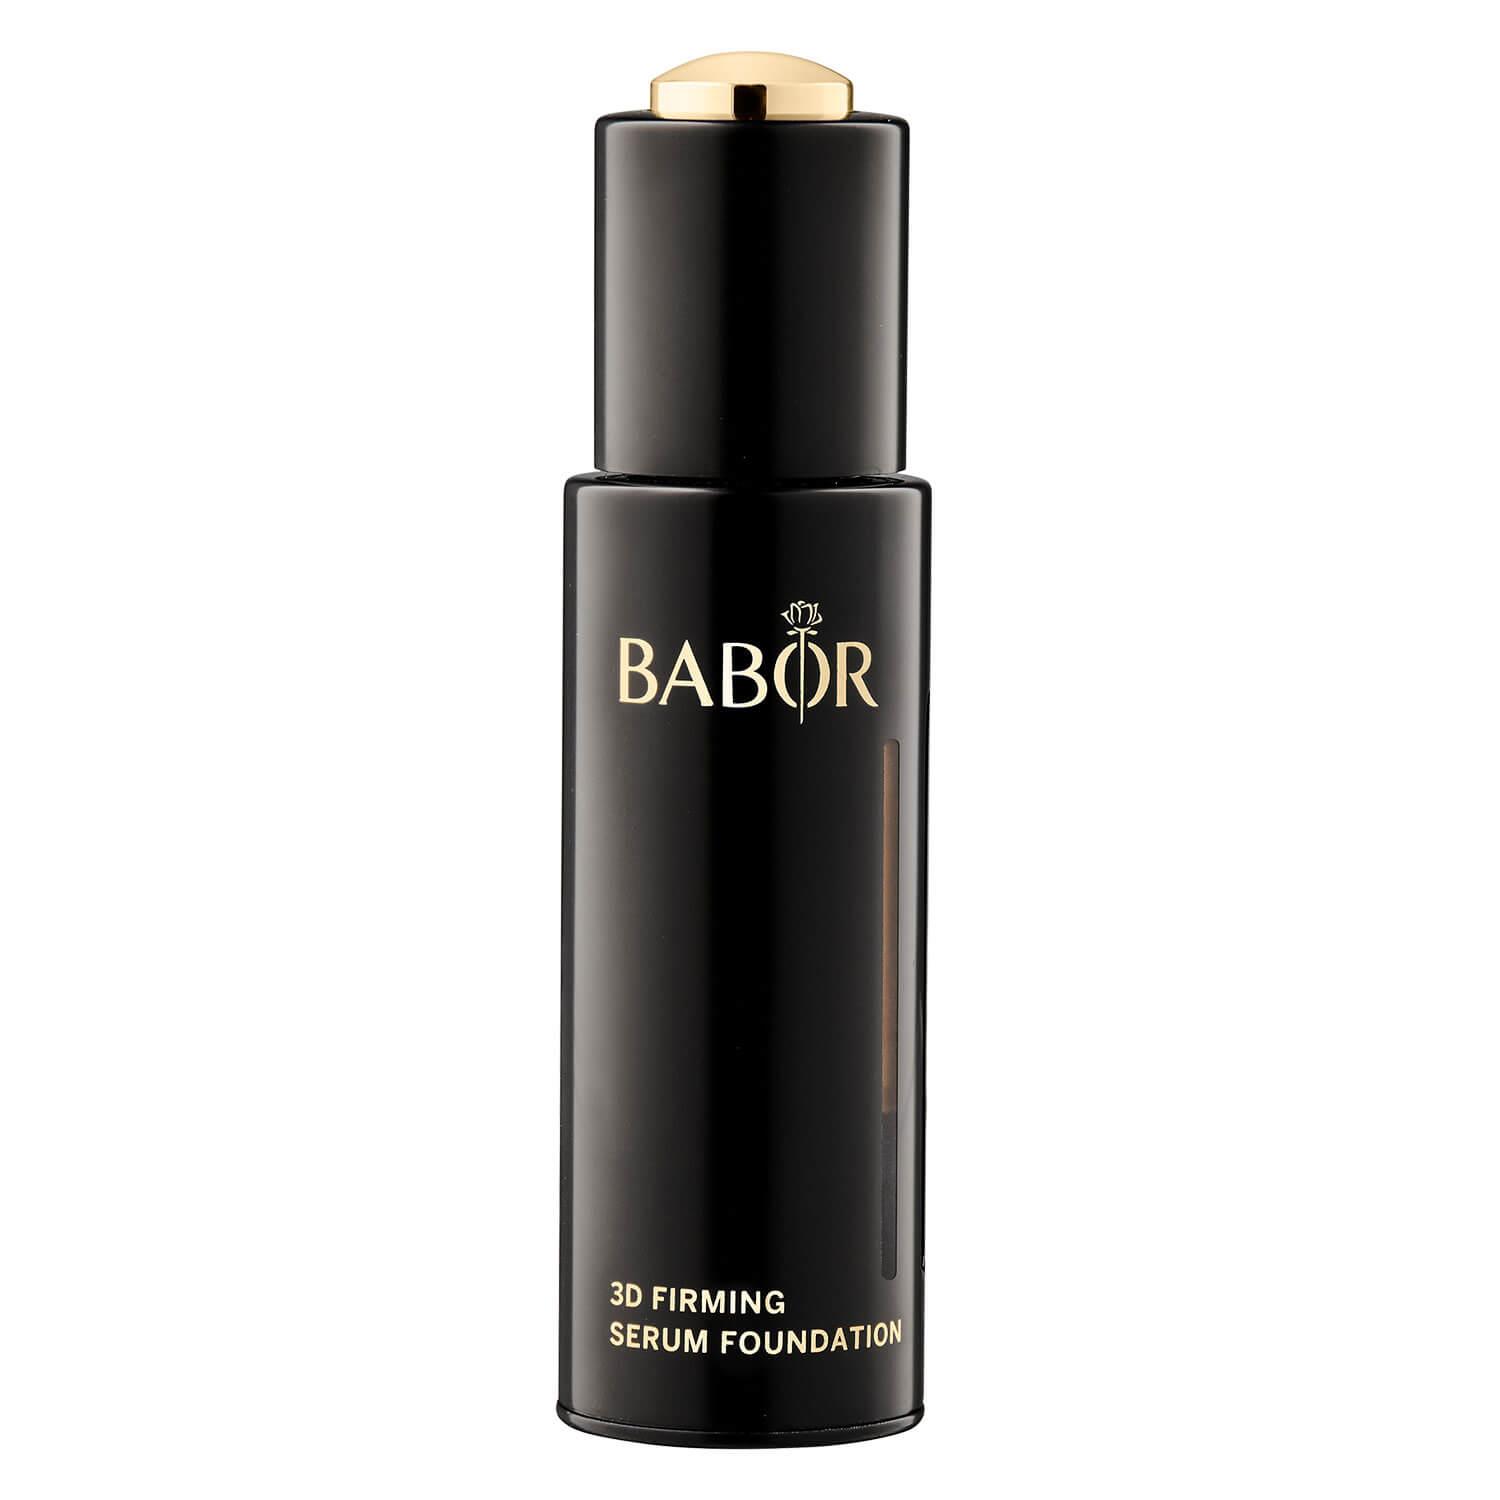 BABOR MAKE UP - 3D Firming Serum Foundation 02 Ivory